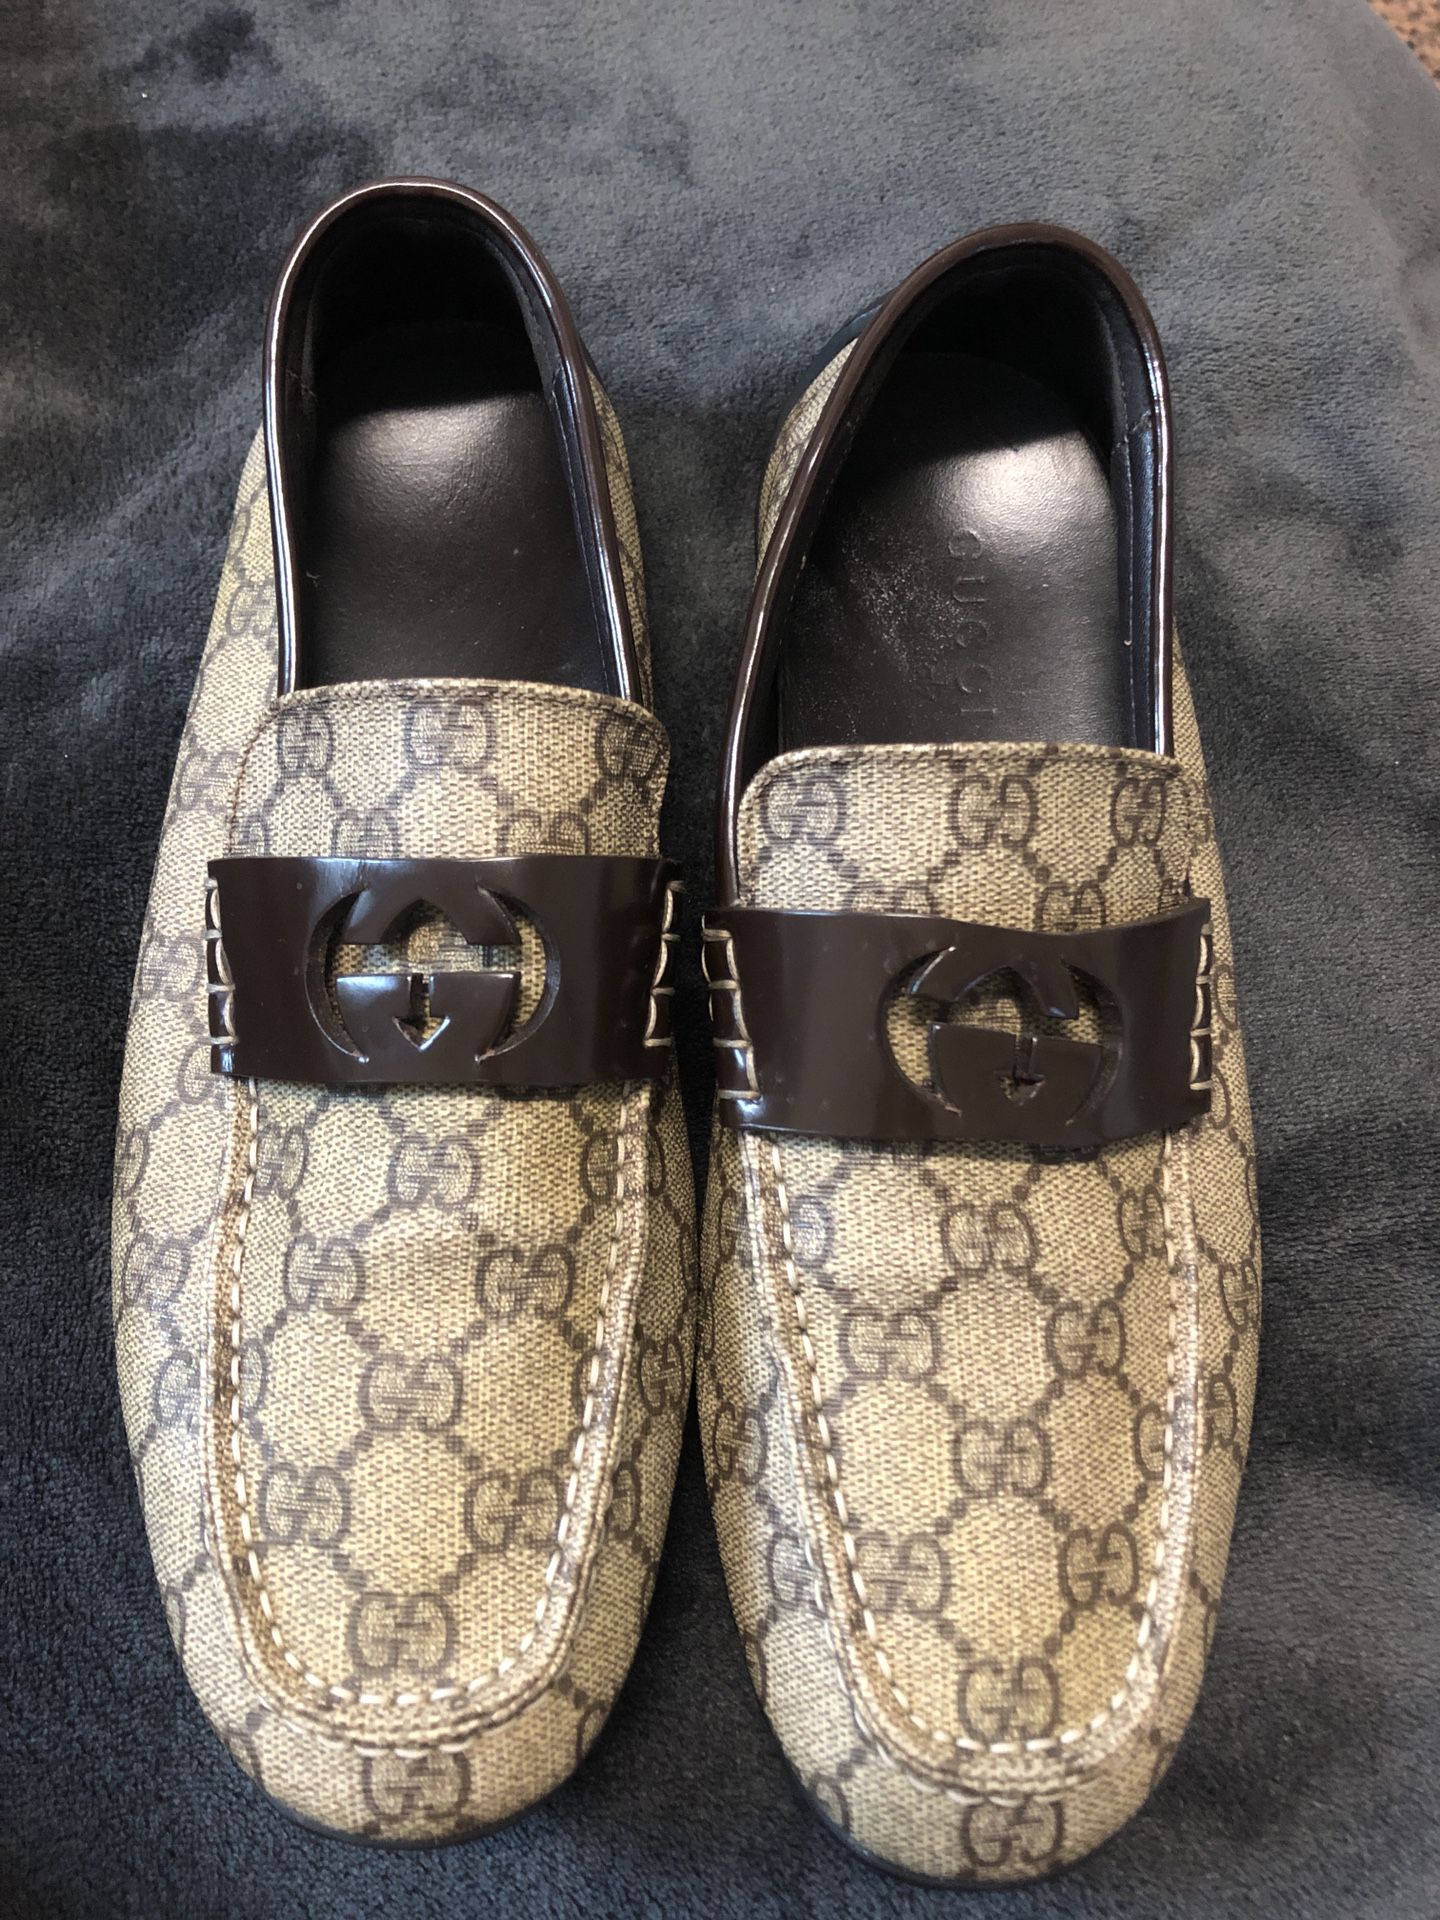 Gucci Loafers (authentic) for Sale in Diamond Bar, CA - OfferUp